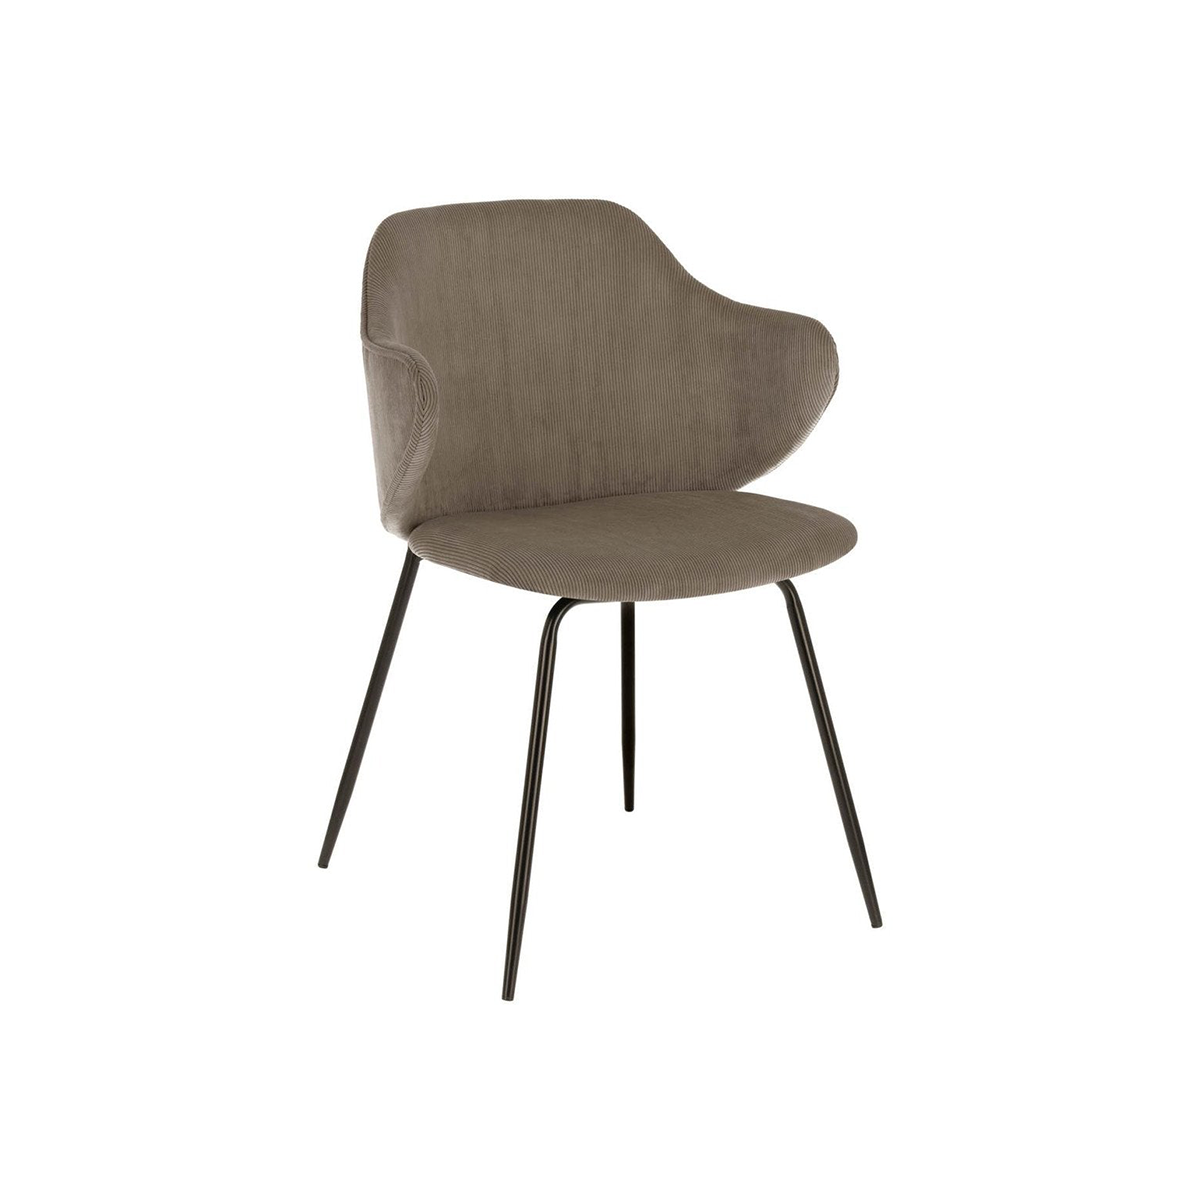 FondHouse Butte Fabric Dining Chair in Grey Corduroy